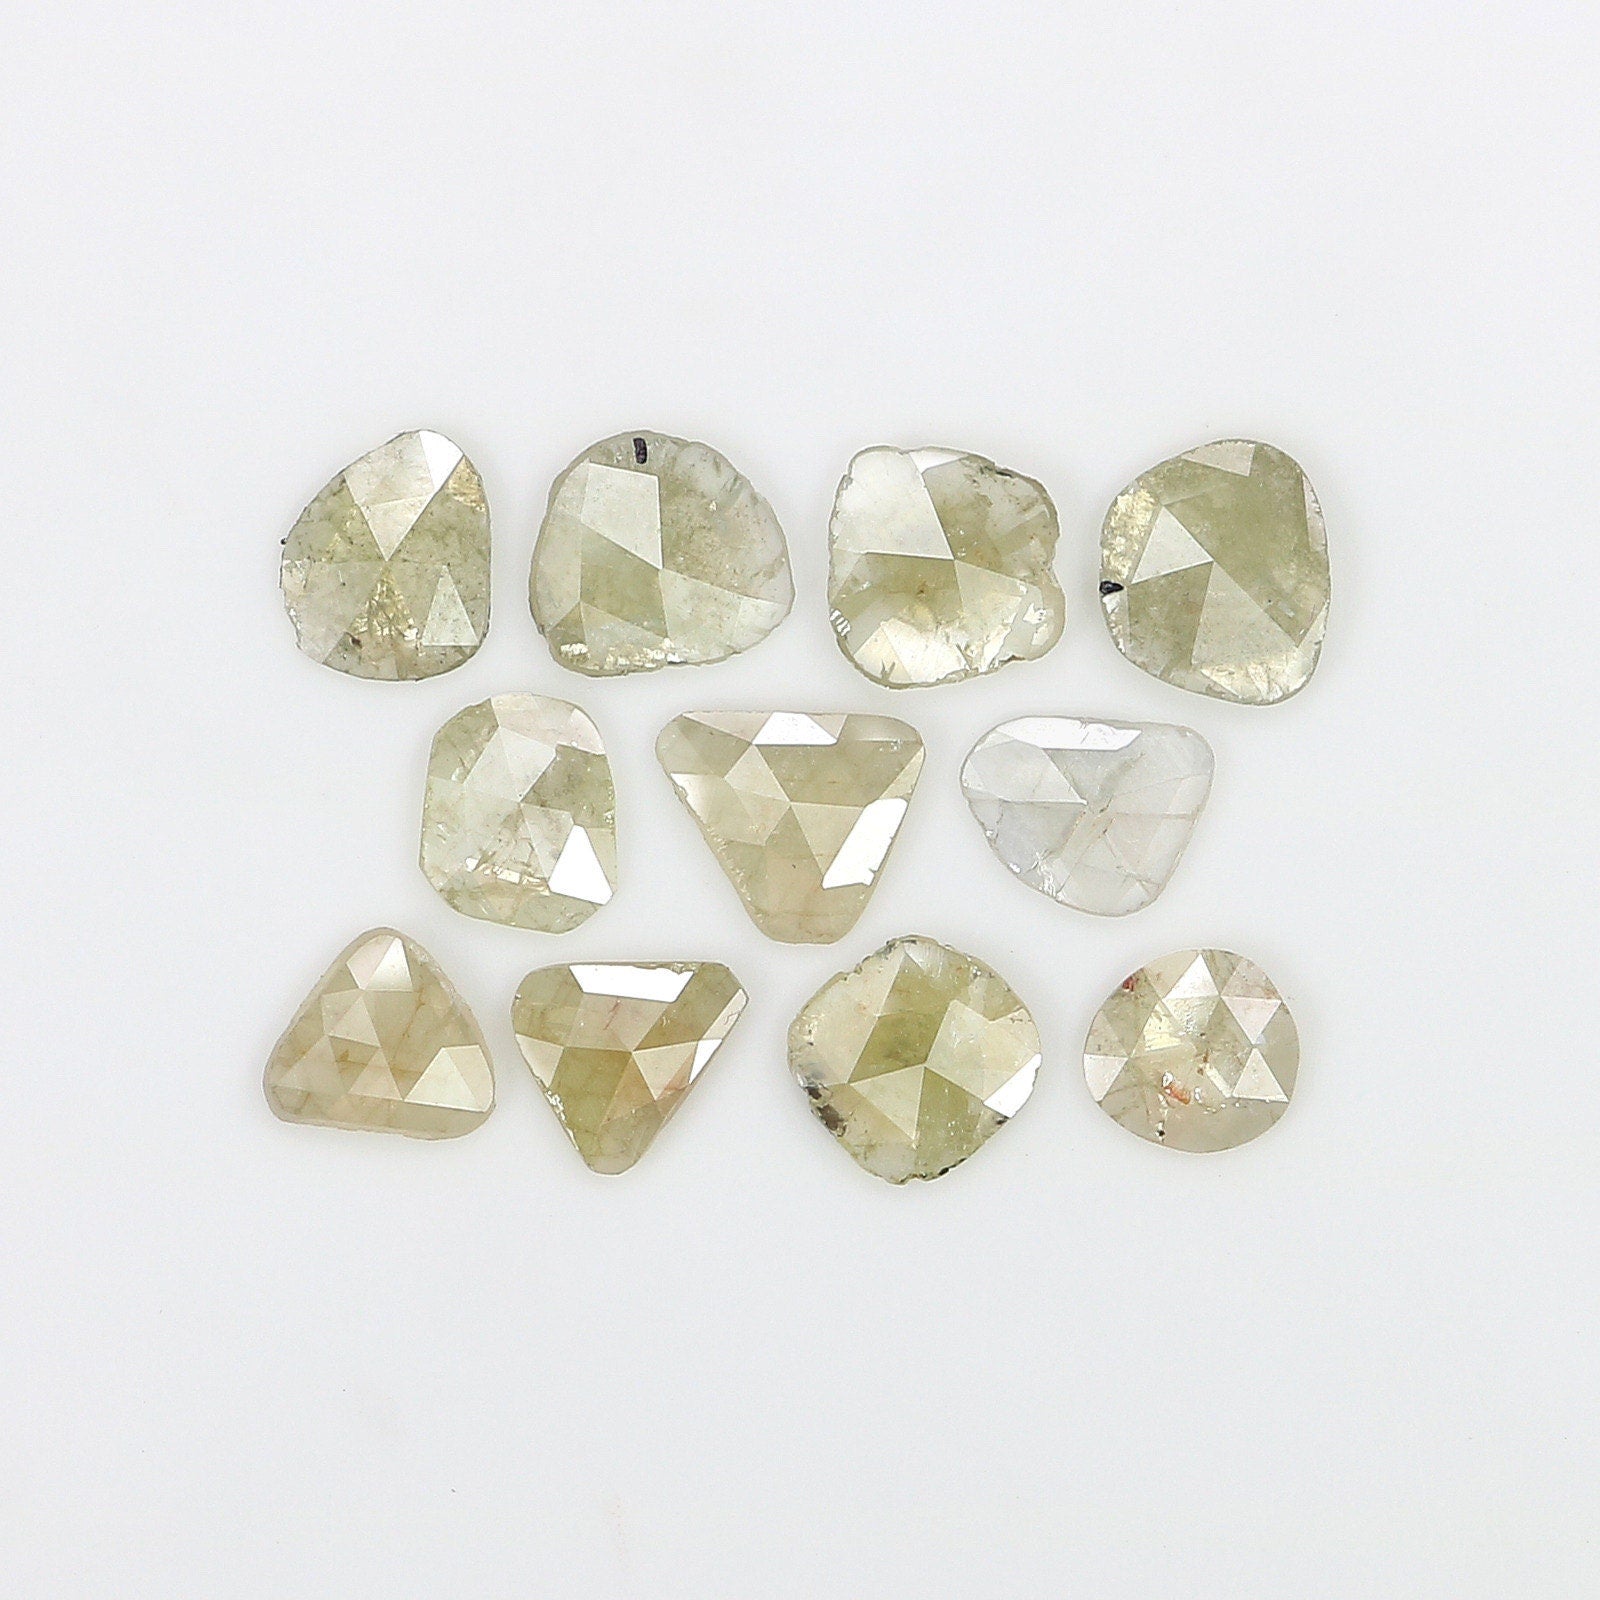 4.88 Ct (11 pieces) of Slice lot for Sam Wilson